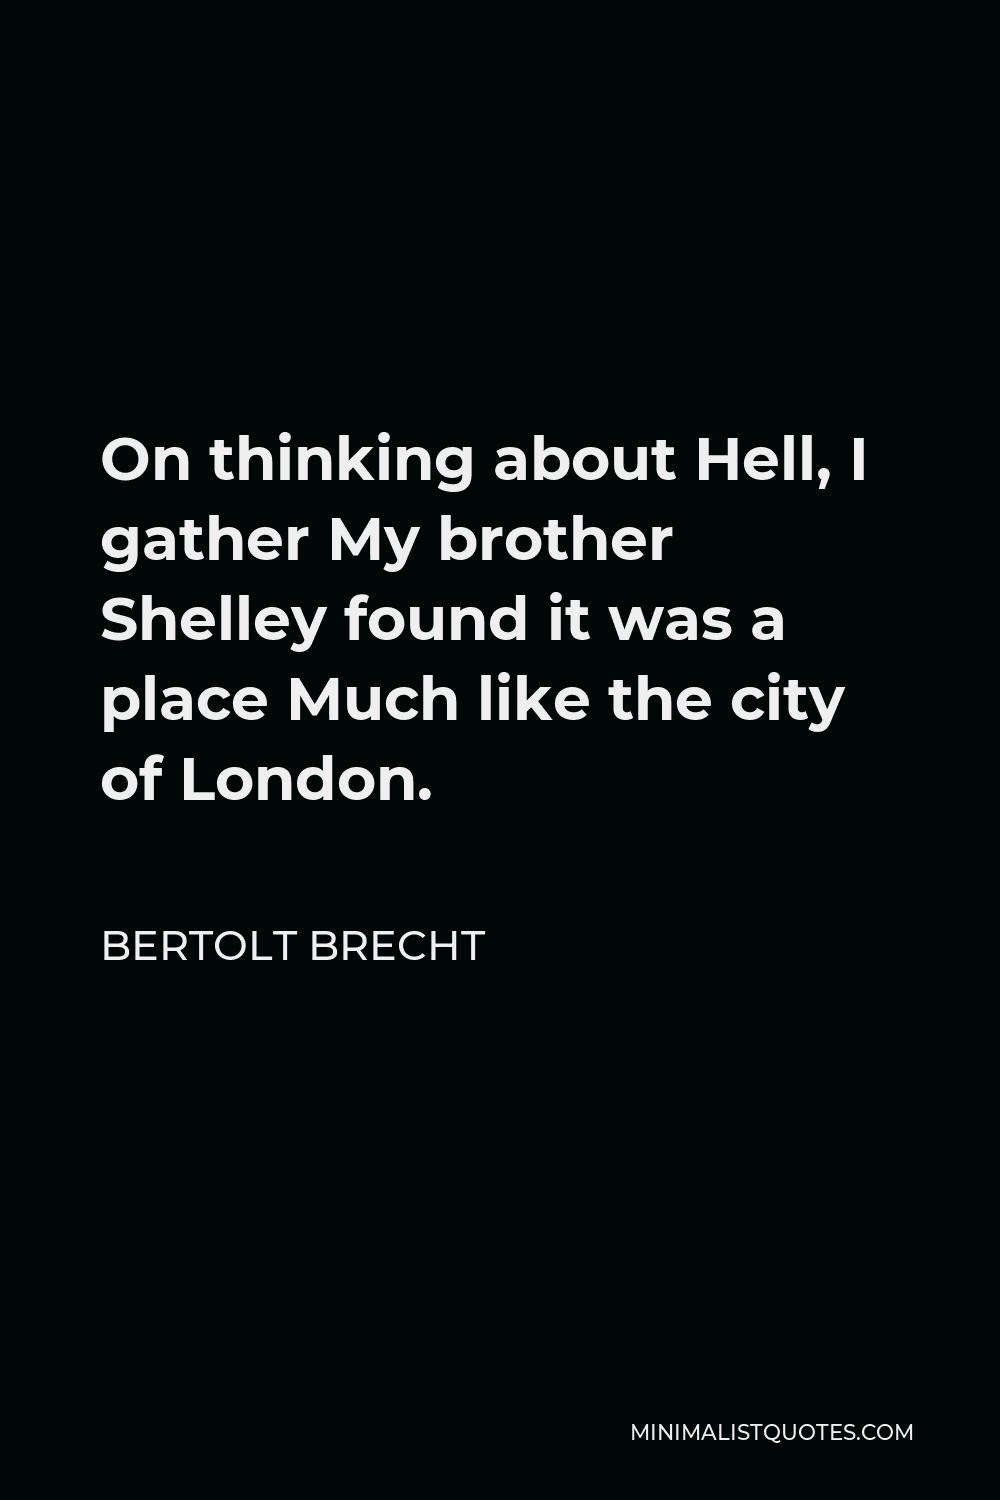 Bertolt Brecht Quote - On thinking about Hell, I gather My brother Shelley found it was a place Much like the city of London.